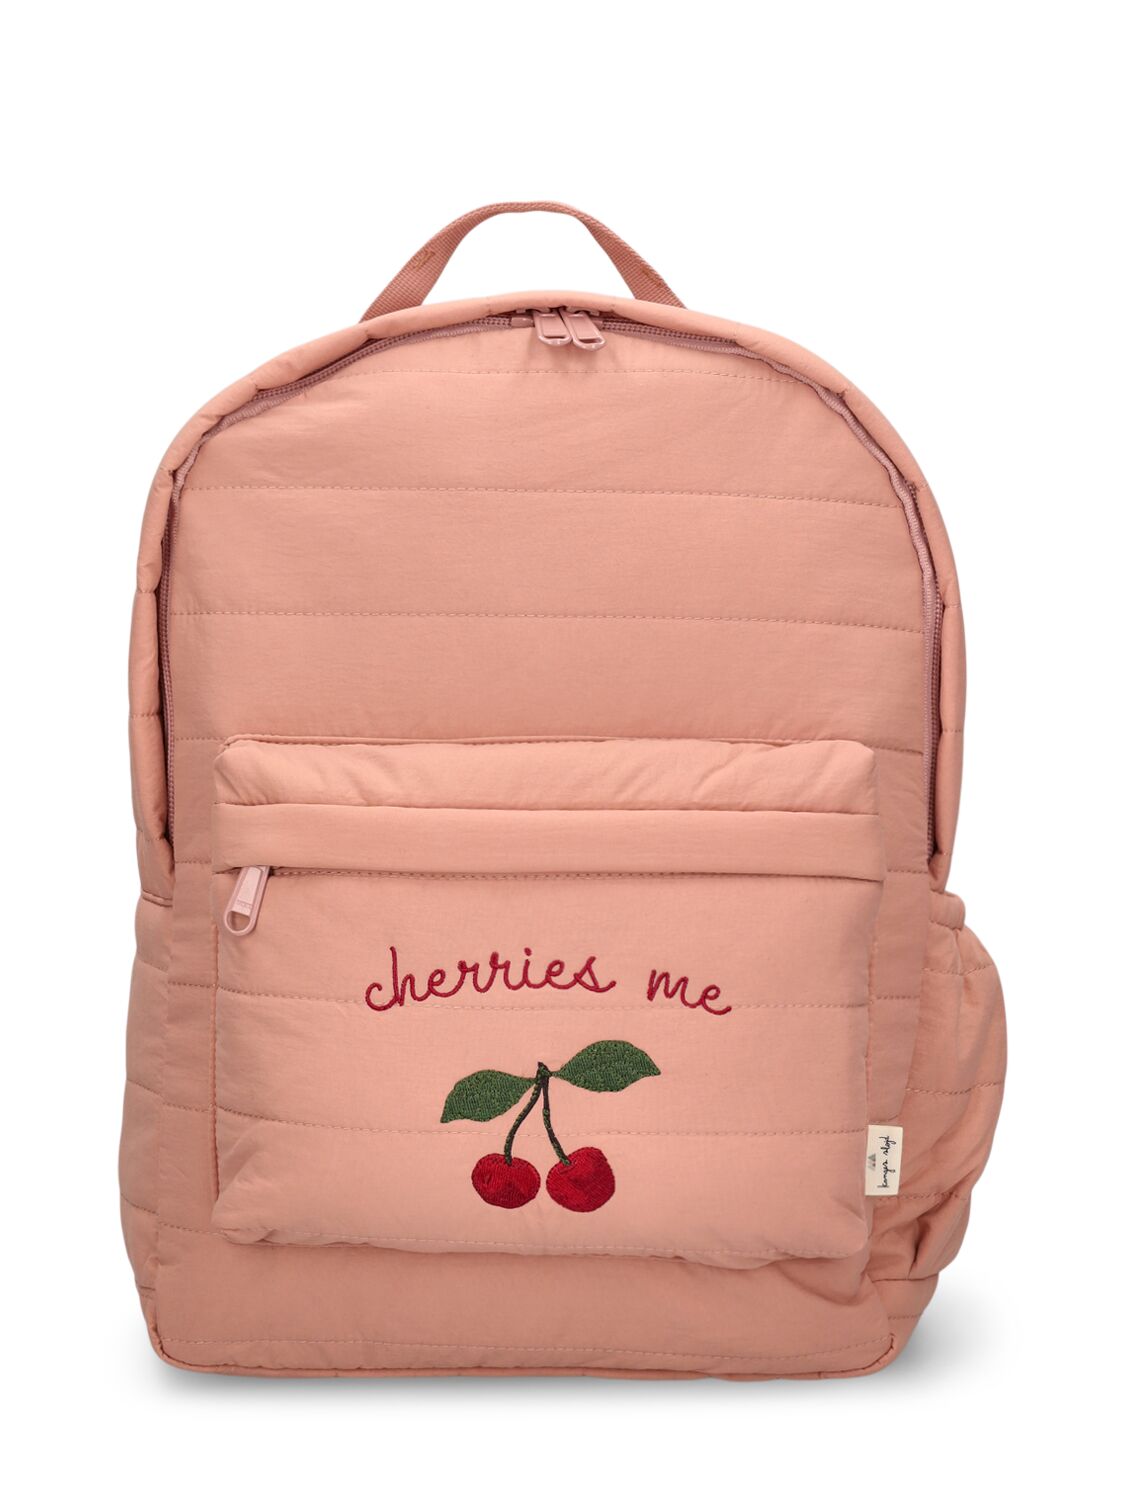 Image of Cherries Me Embroidered Nylon Backpack